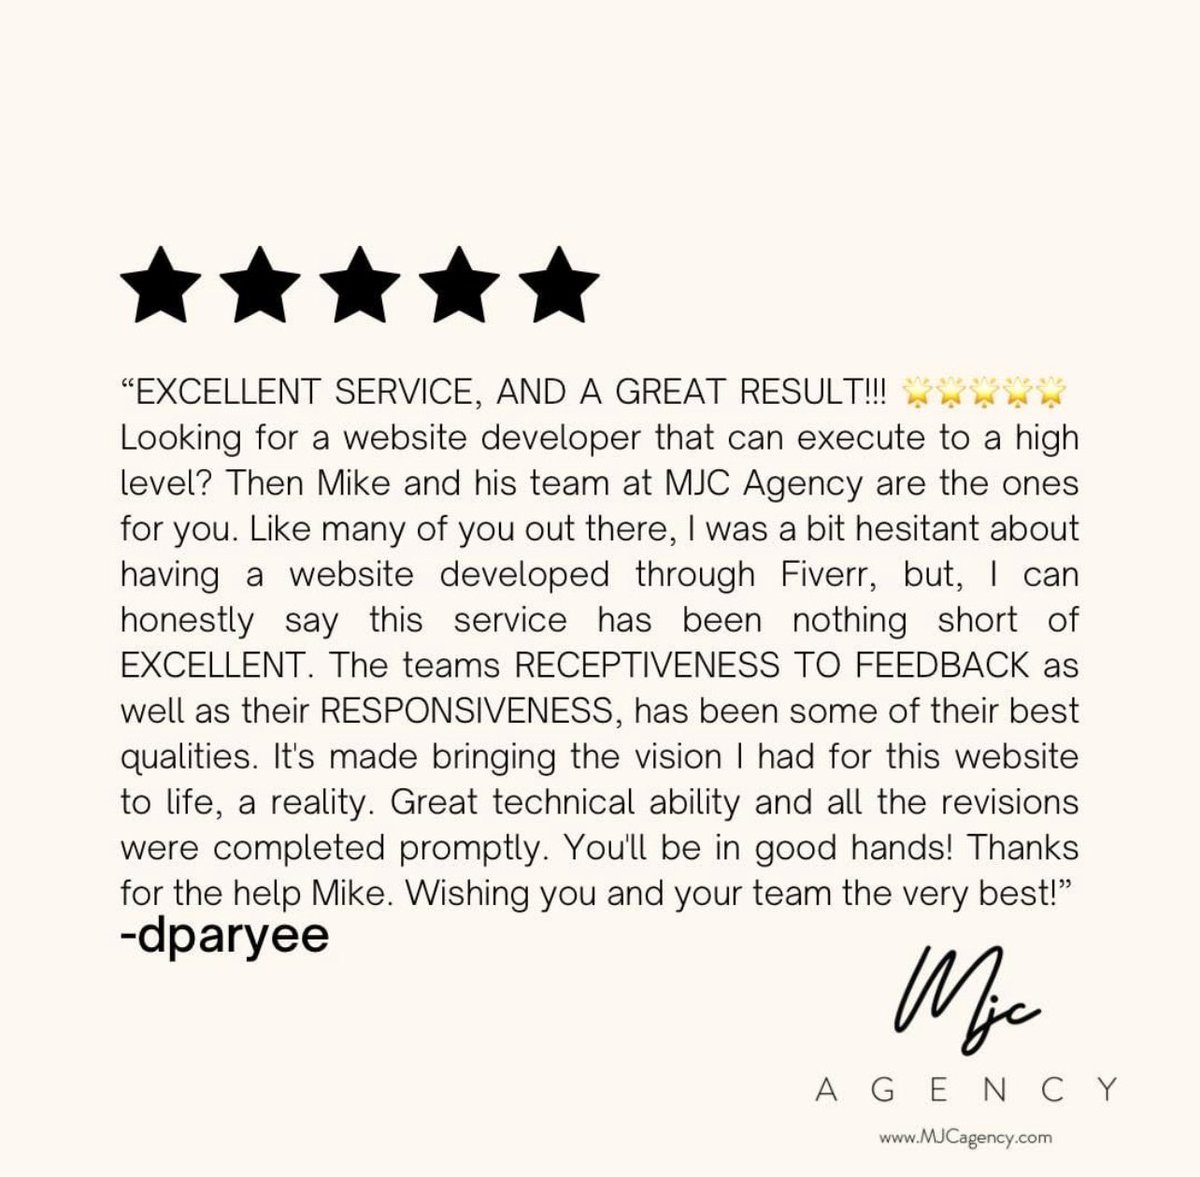 💻Another satisfied client! Thank you so much for your review. We value all of our clients and want to make sure every single one is completely satisfied! Contact us today for your website design needs!💻
 #clientreview #designteam #wixdesign #wixwebsite #websiteidea #newwebsite